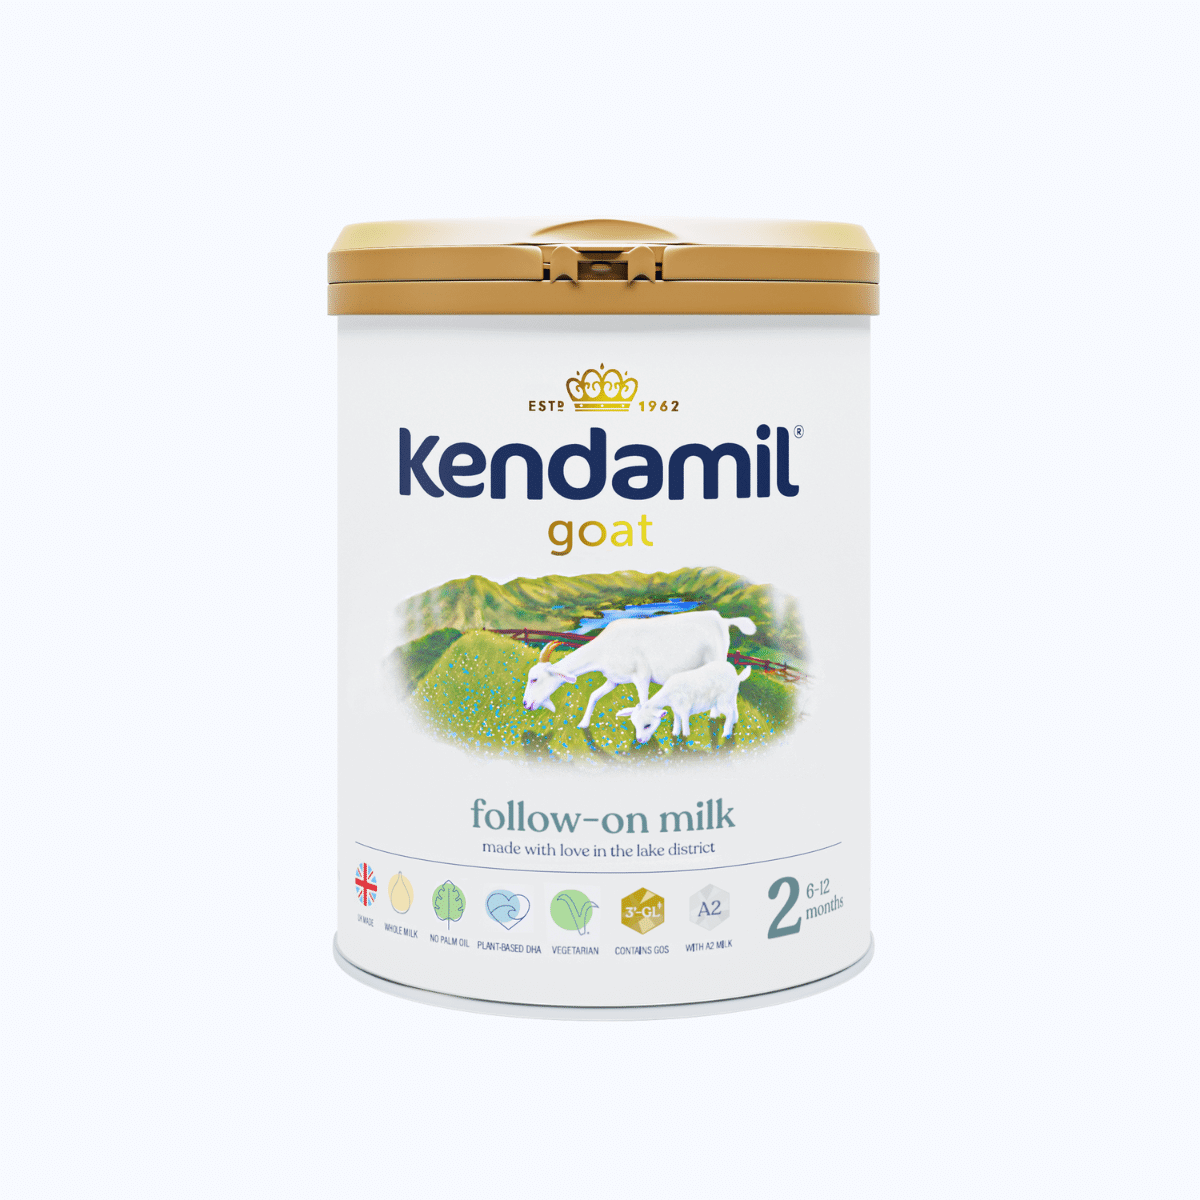 The goat milk follow on formula, suitable for 6 month year old babies and onwards by Kendamil.